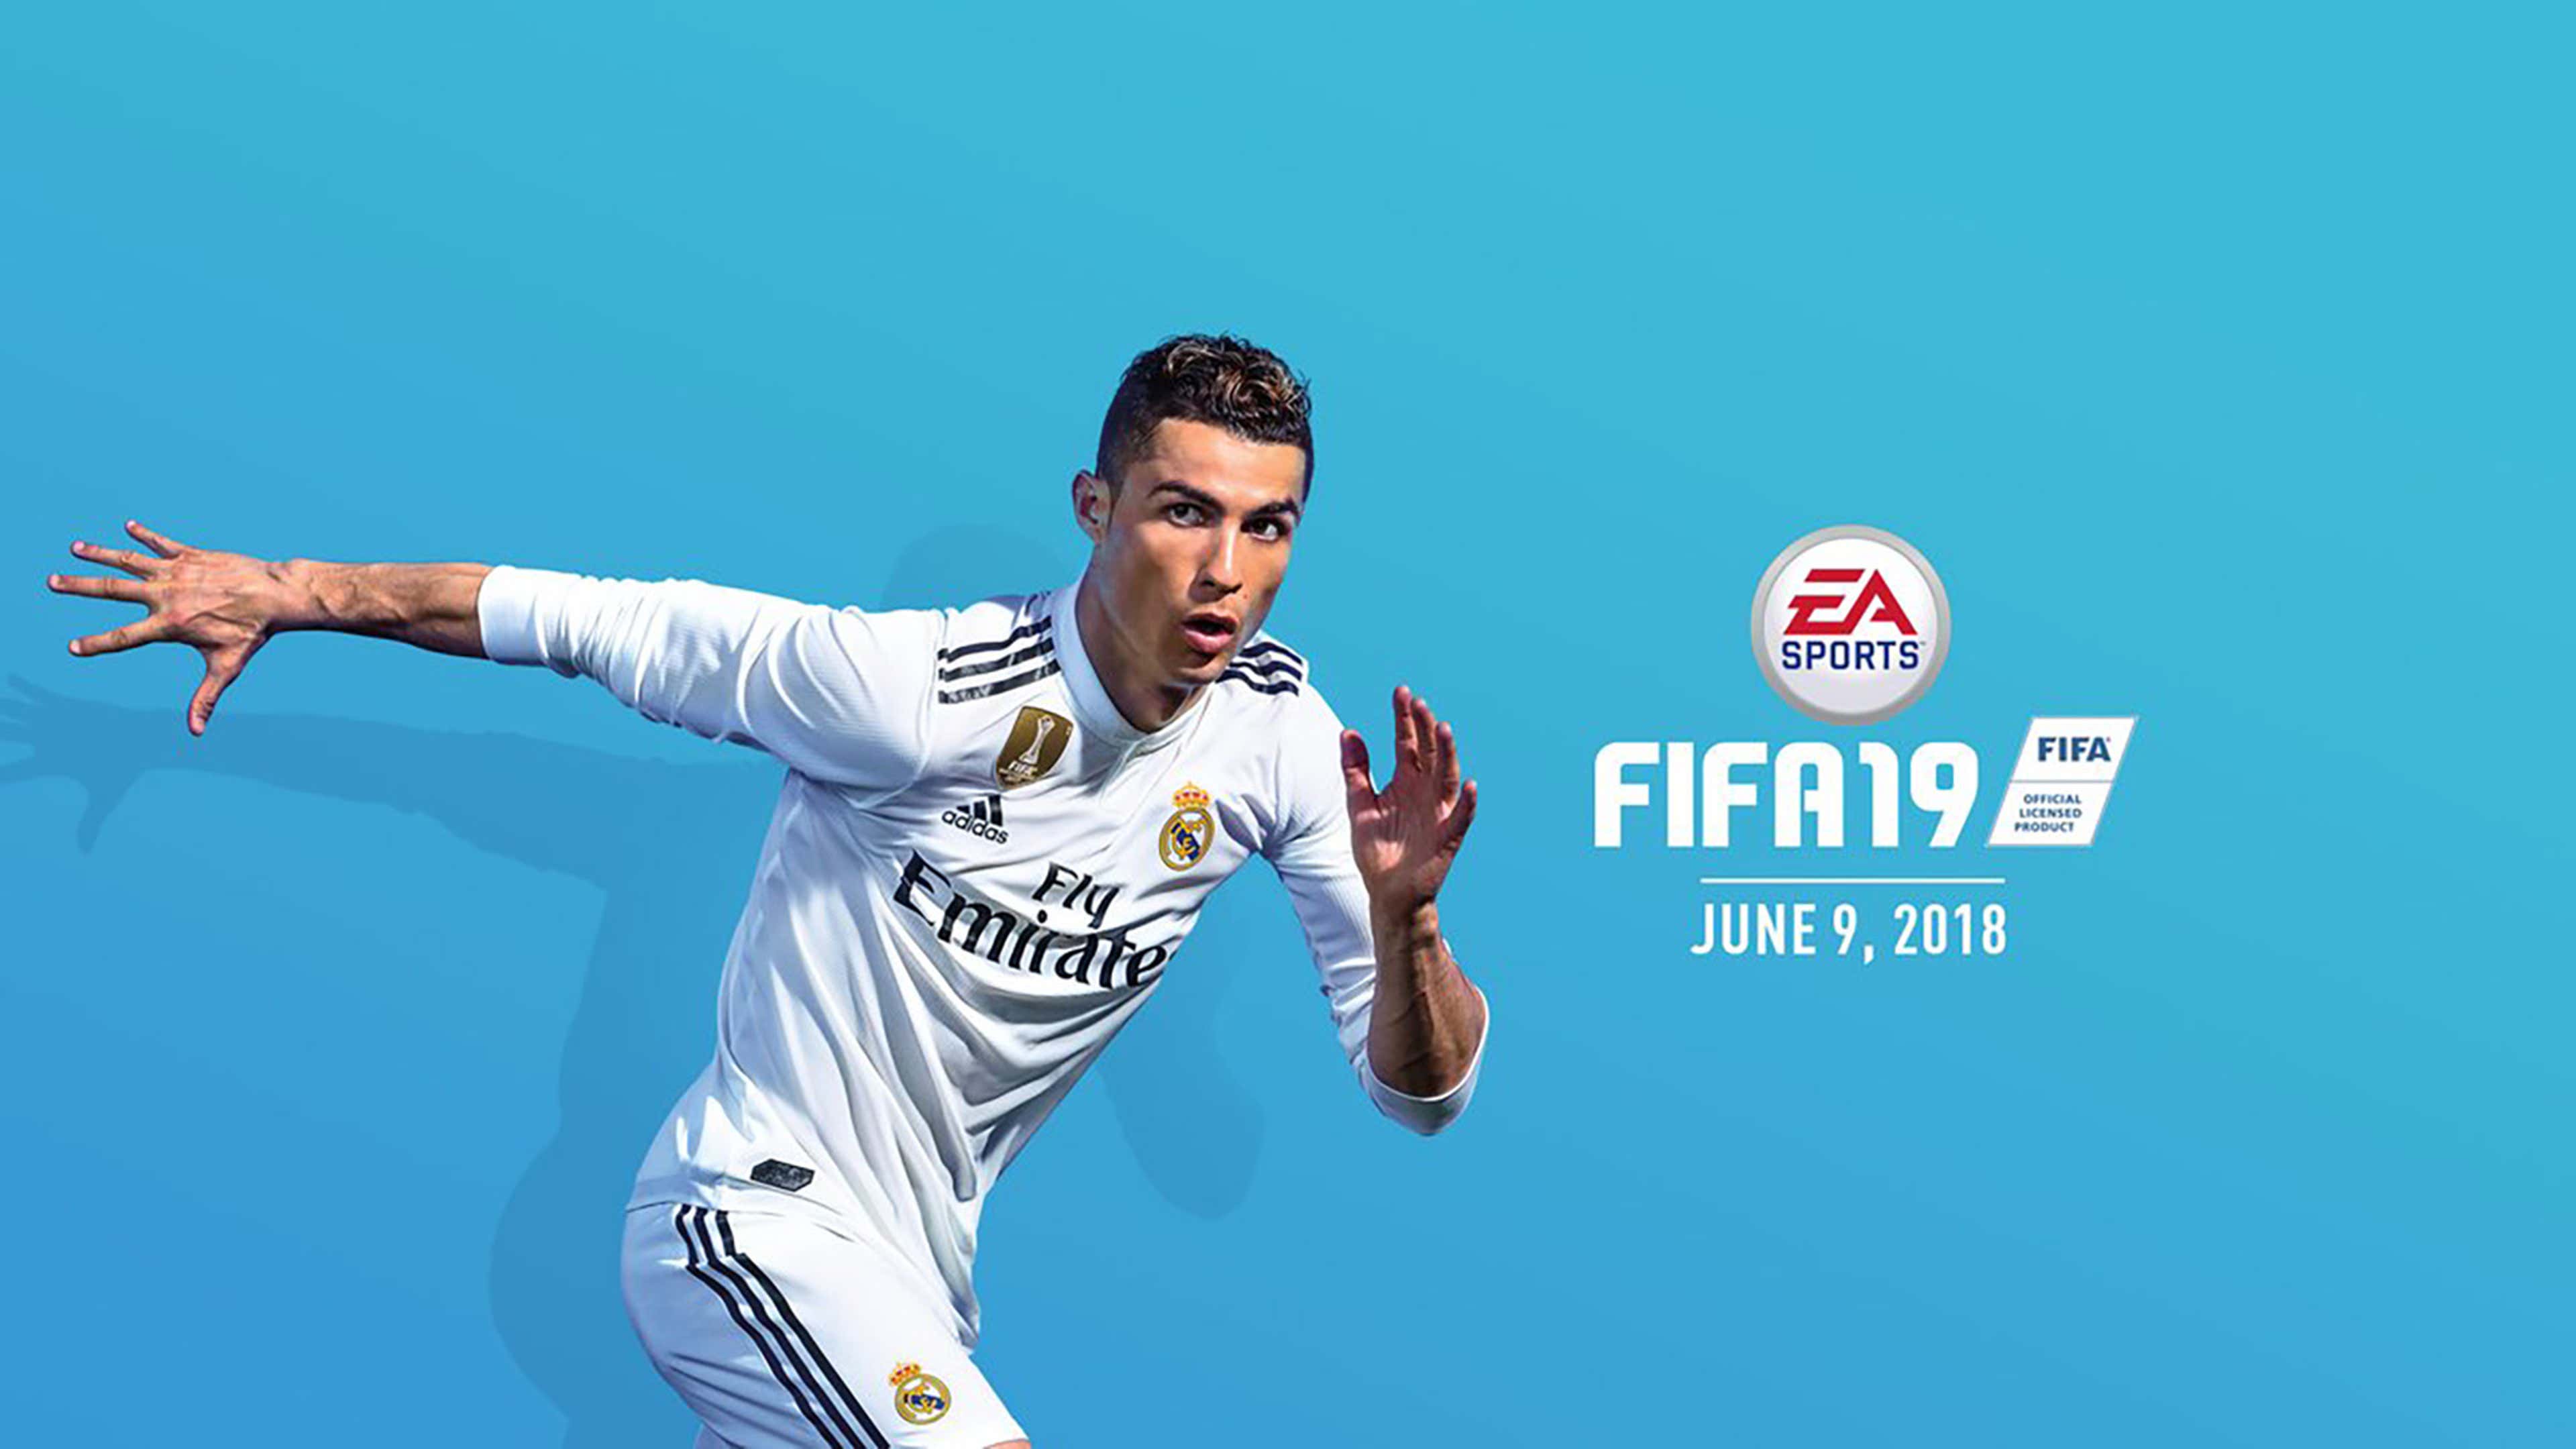 First look: Cristiano Ronaldo is the cover star for 'FIFA 18